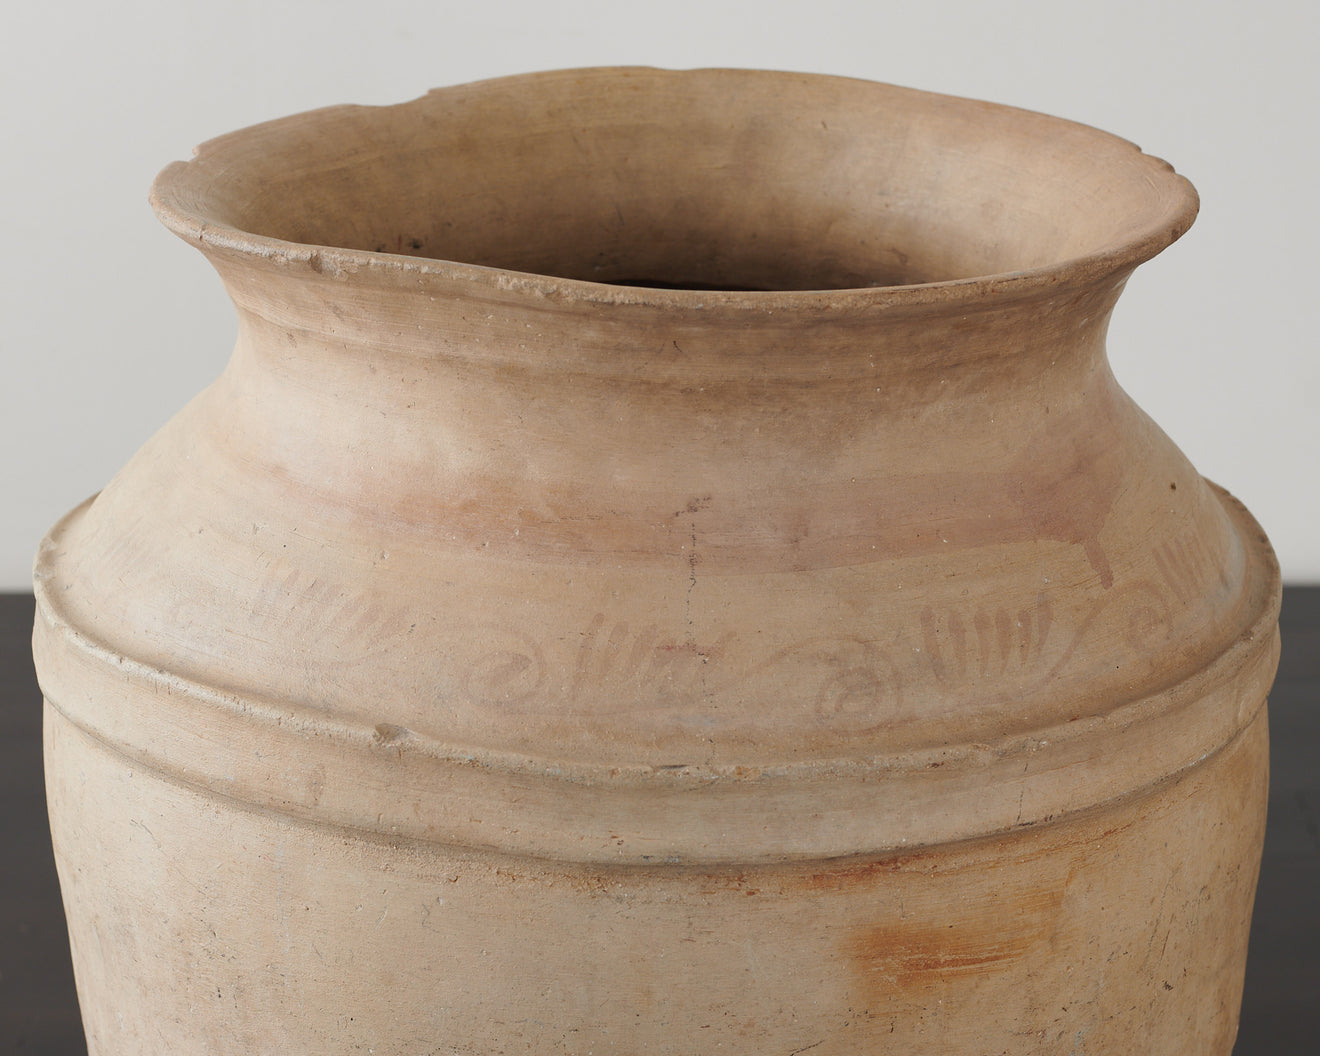 Terracotta urn with traces of polychrome